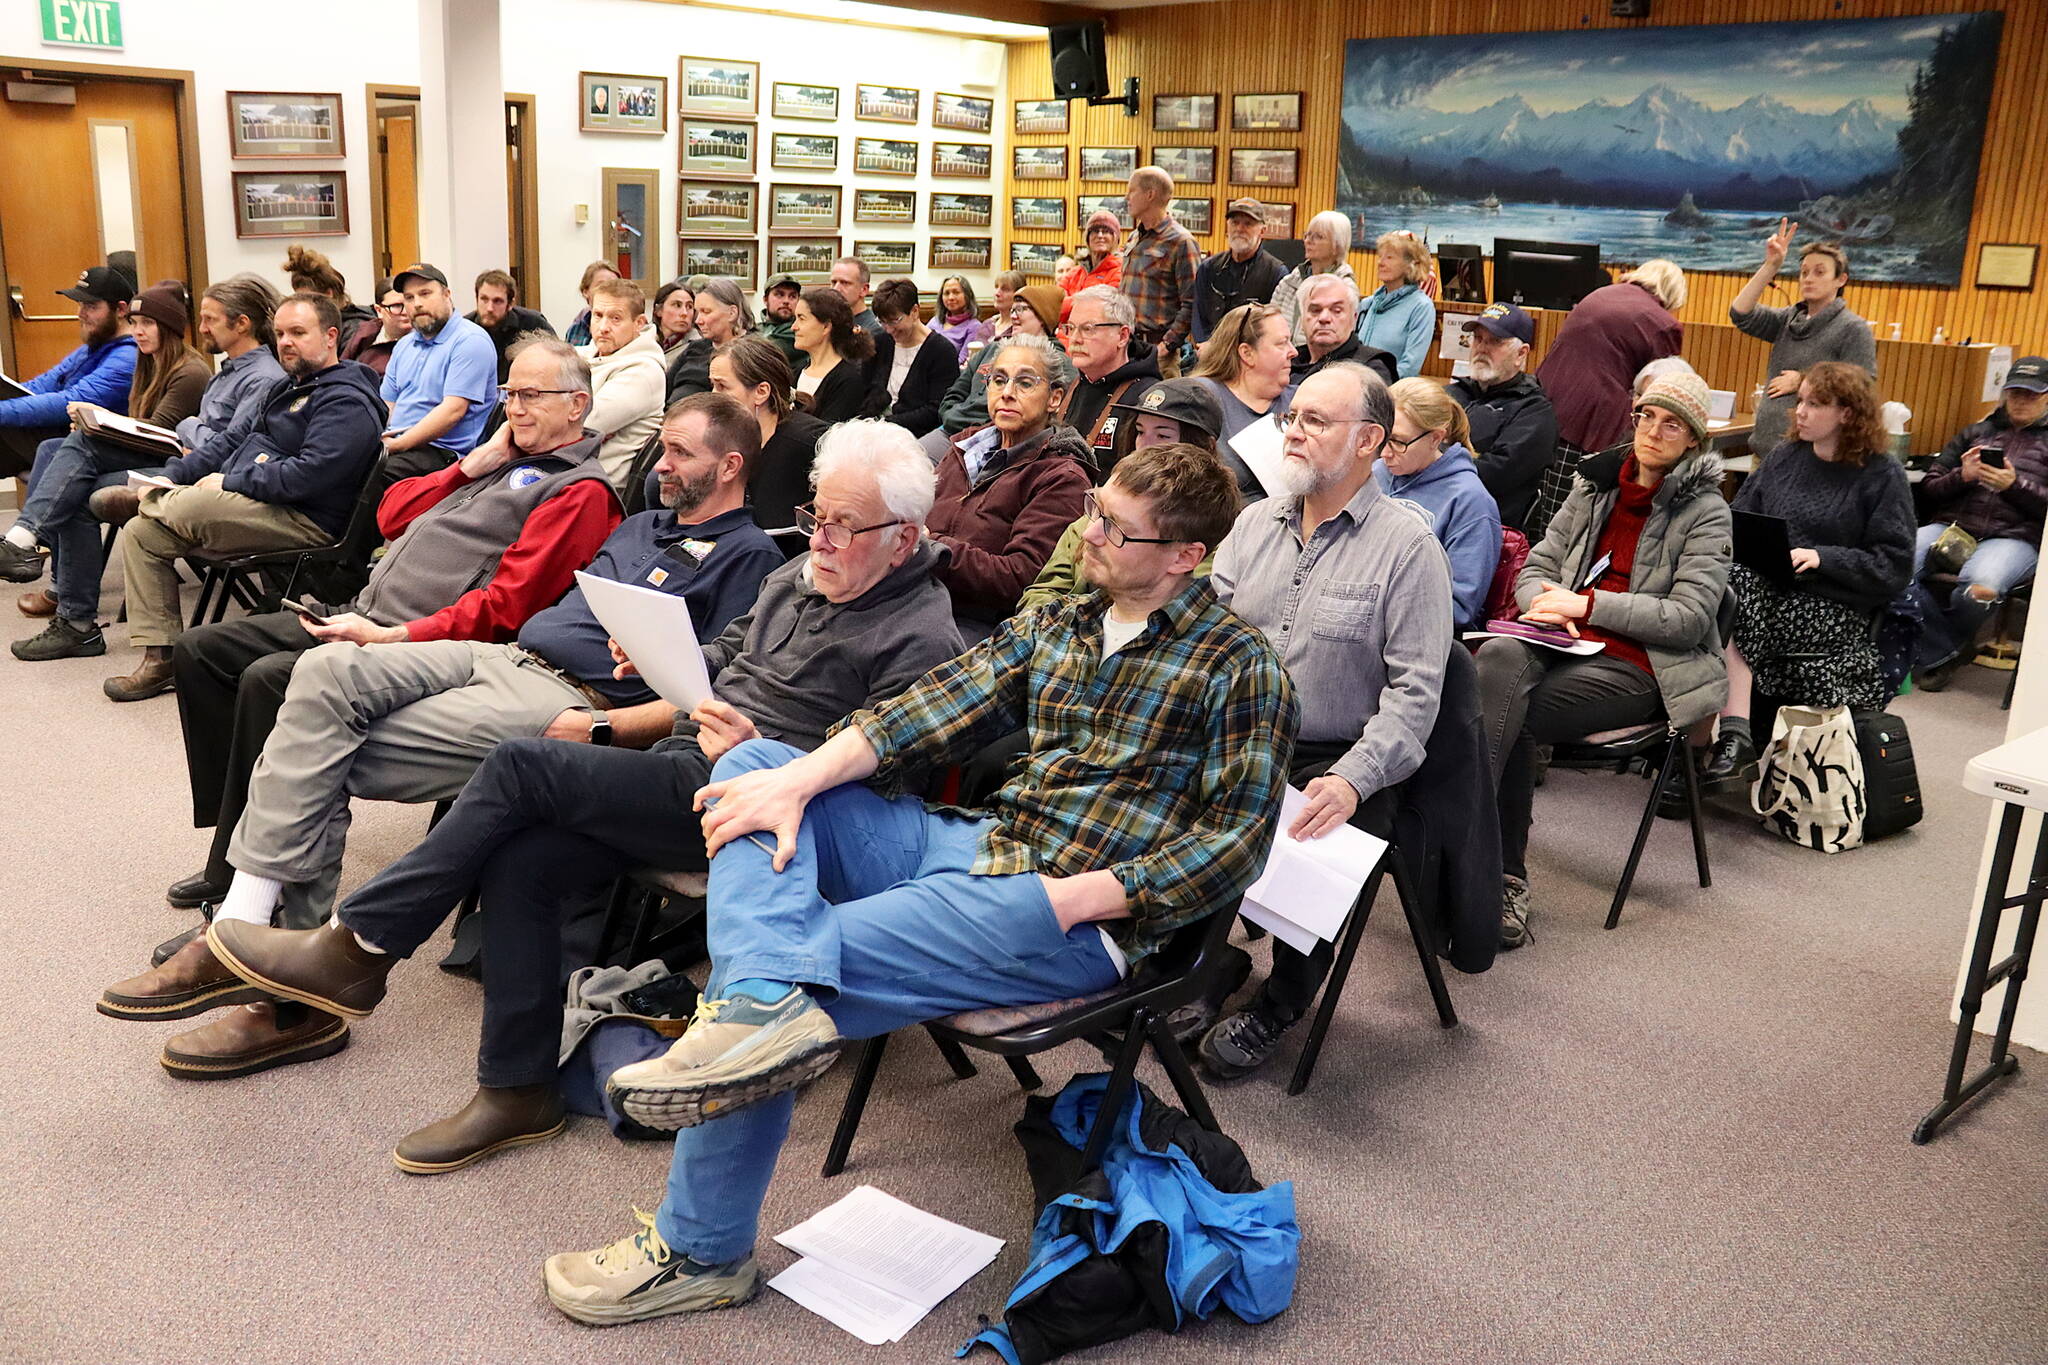 Dozens of people fill the Assembly chambers to testify during a Juneau Assembly meeting on Monday night. Most of the people spoke about either a proposed municipal compost facility, or an ordinance updating landslide and avalanche zone maps. (Mark Sabbatini / Juneau Empire)